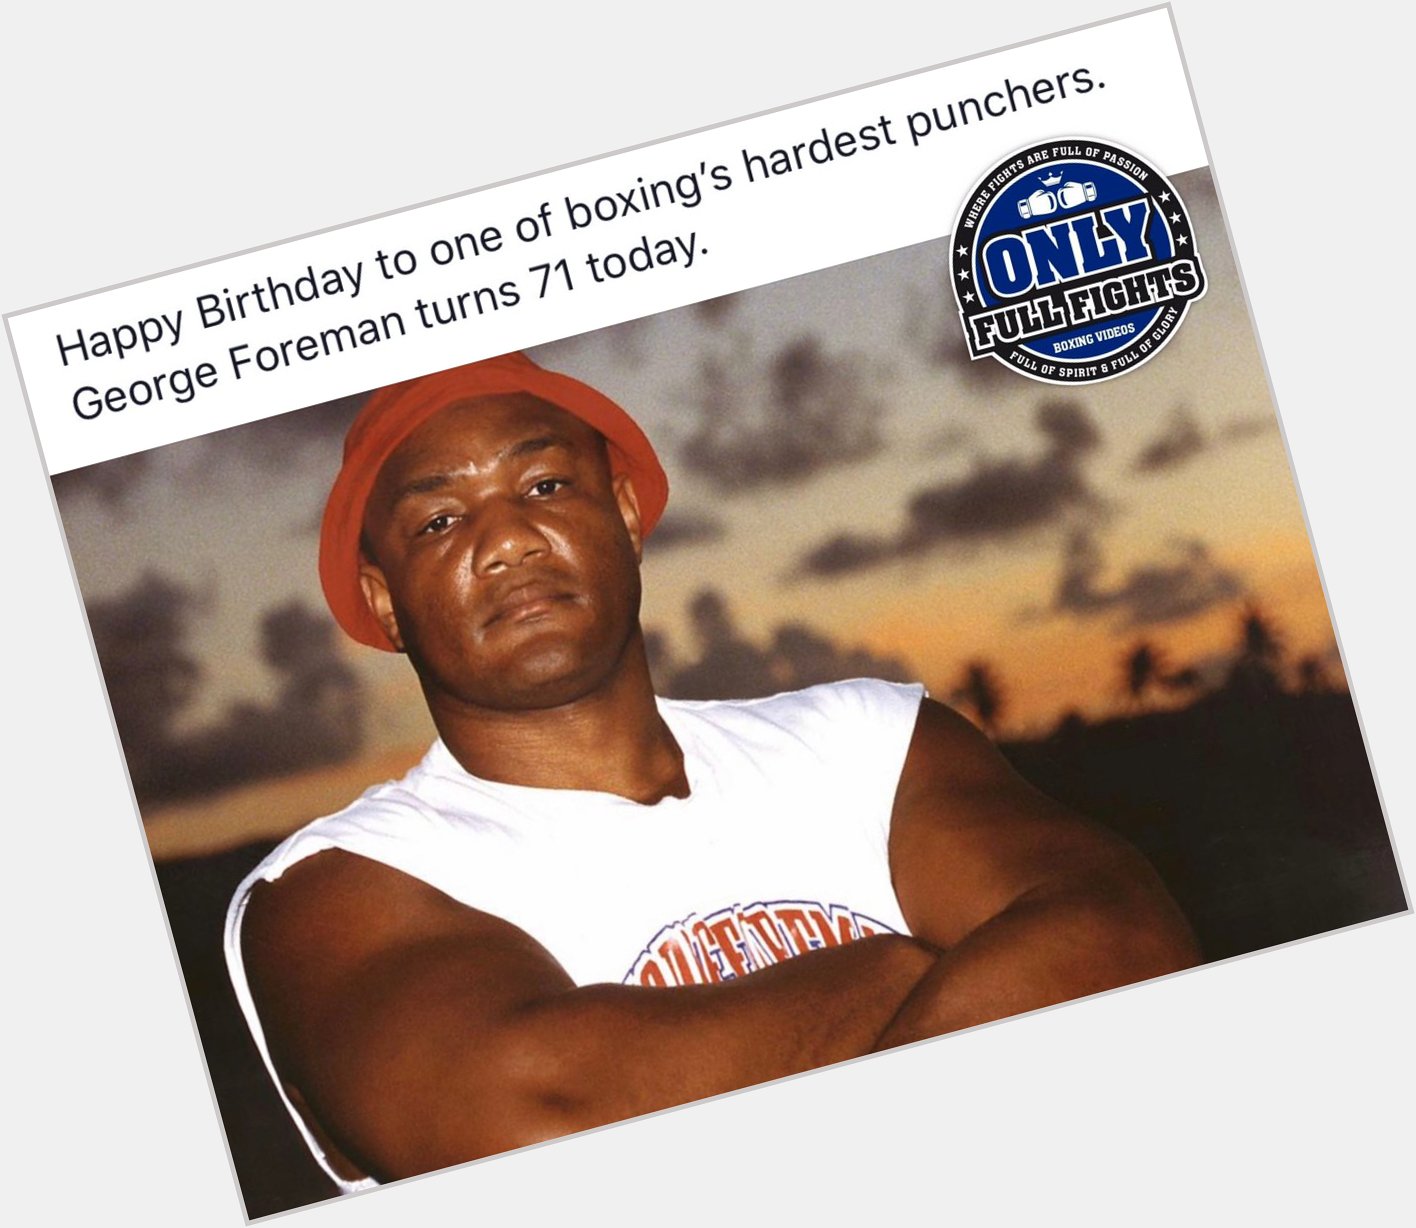 Happy Birthday to one of boxing s hardest punchers. George Foreman turns 71 today. 